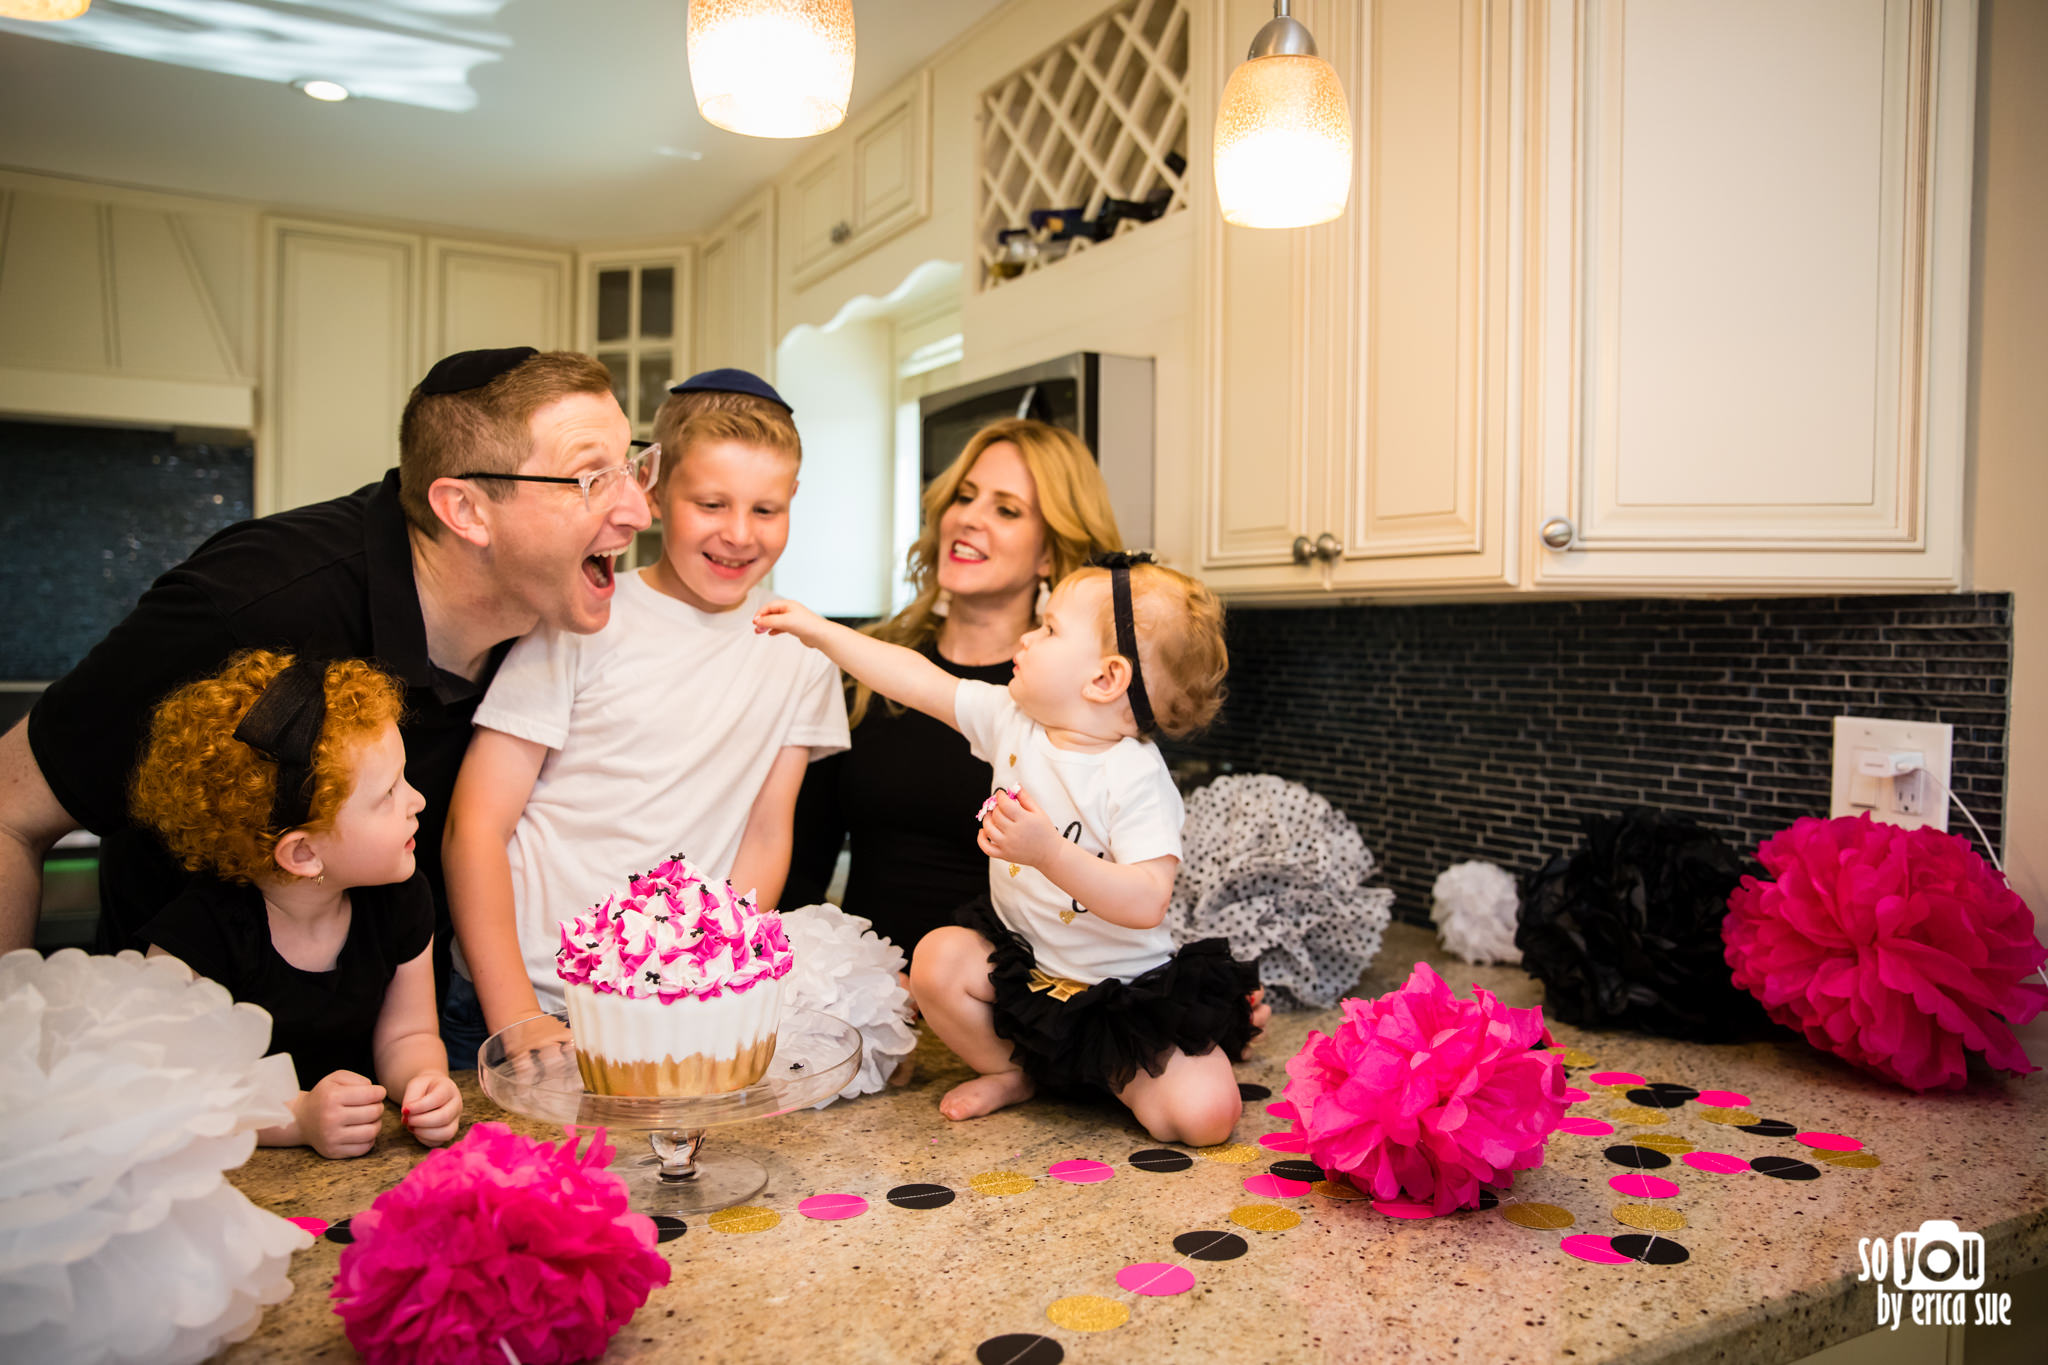 so-you-by-erica-sue-hollywood-fl-photographer-in-home-lifestyle-1st-birthday-cake-smash-3890.jpg